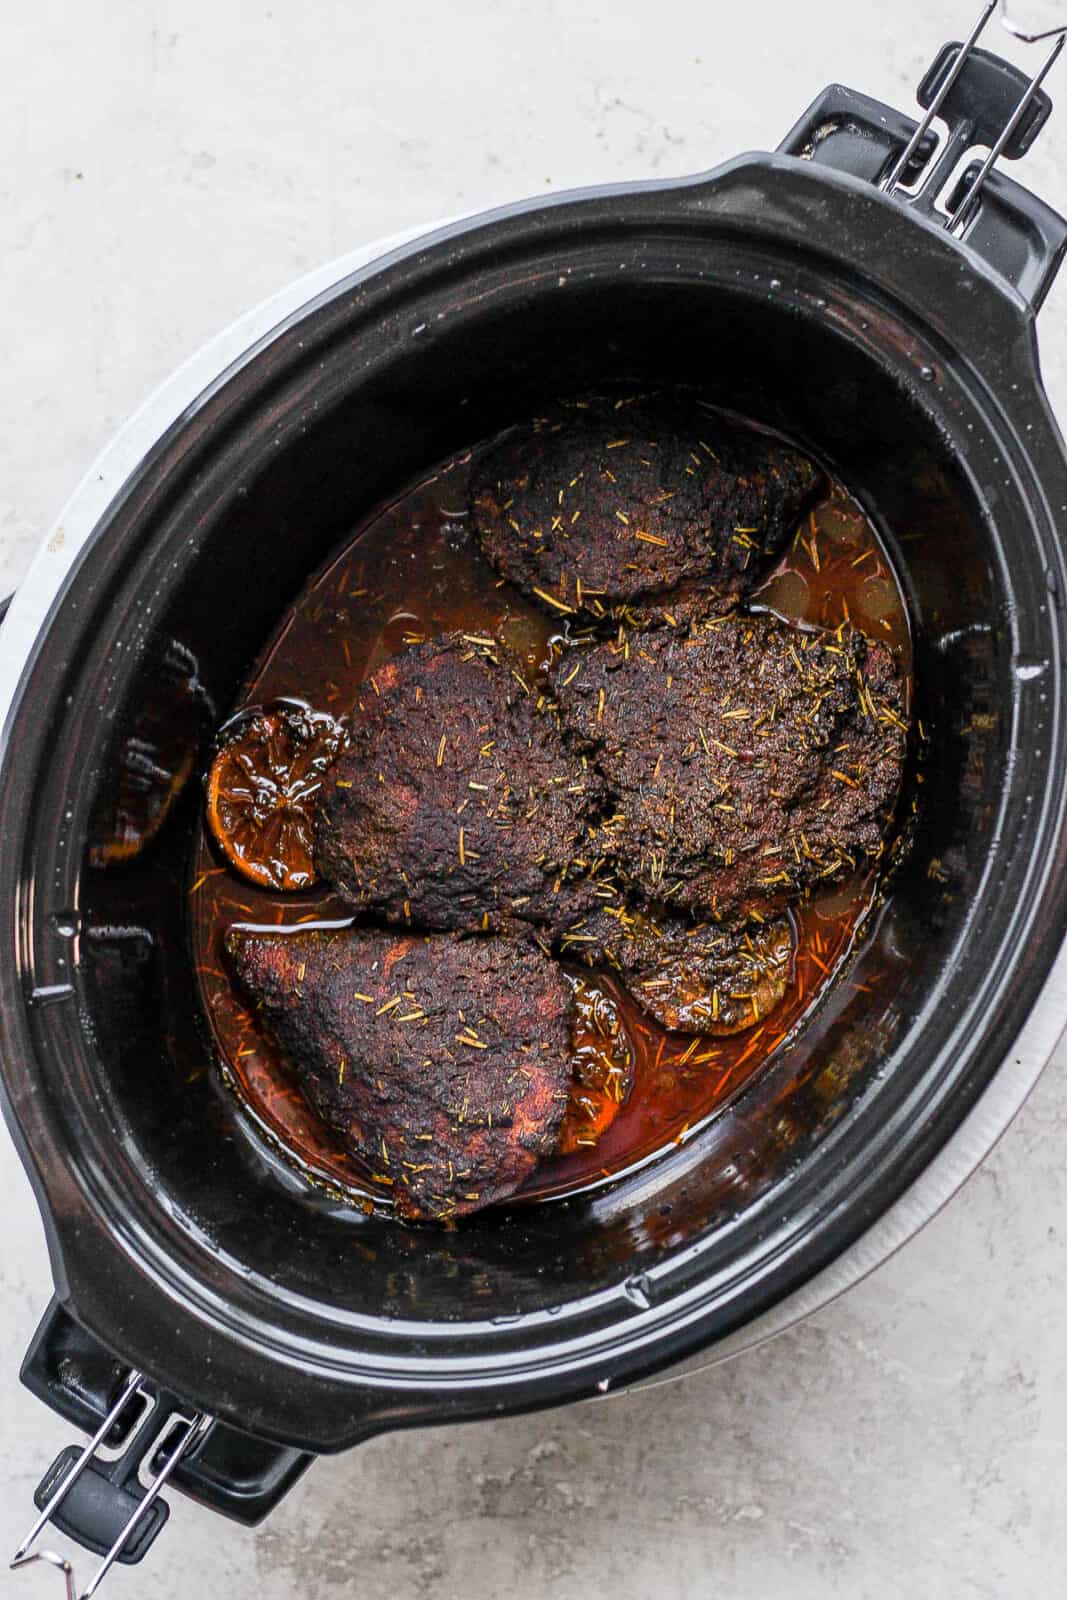 Four chicken breasts covered in jerk seasoning inside a slow cooker after cooking. 